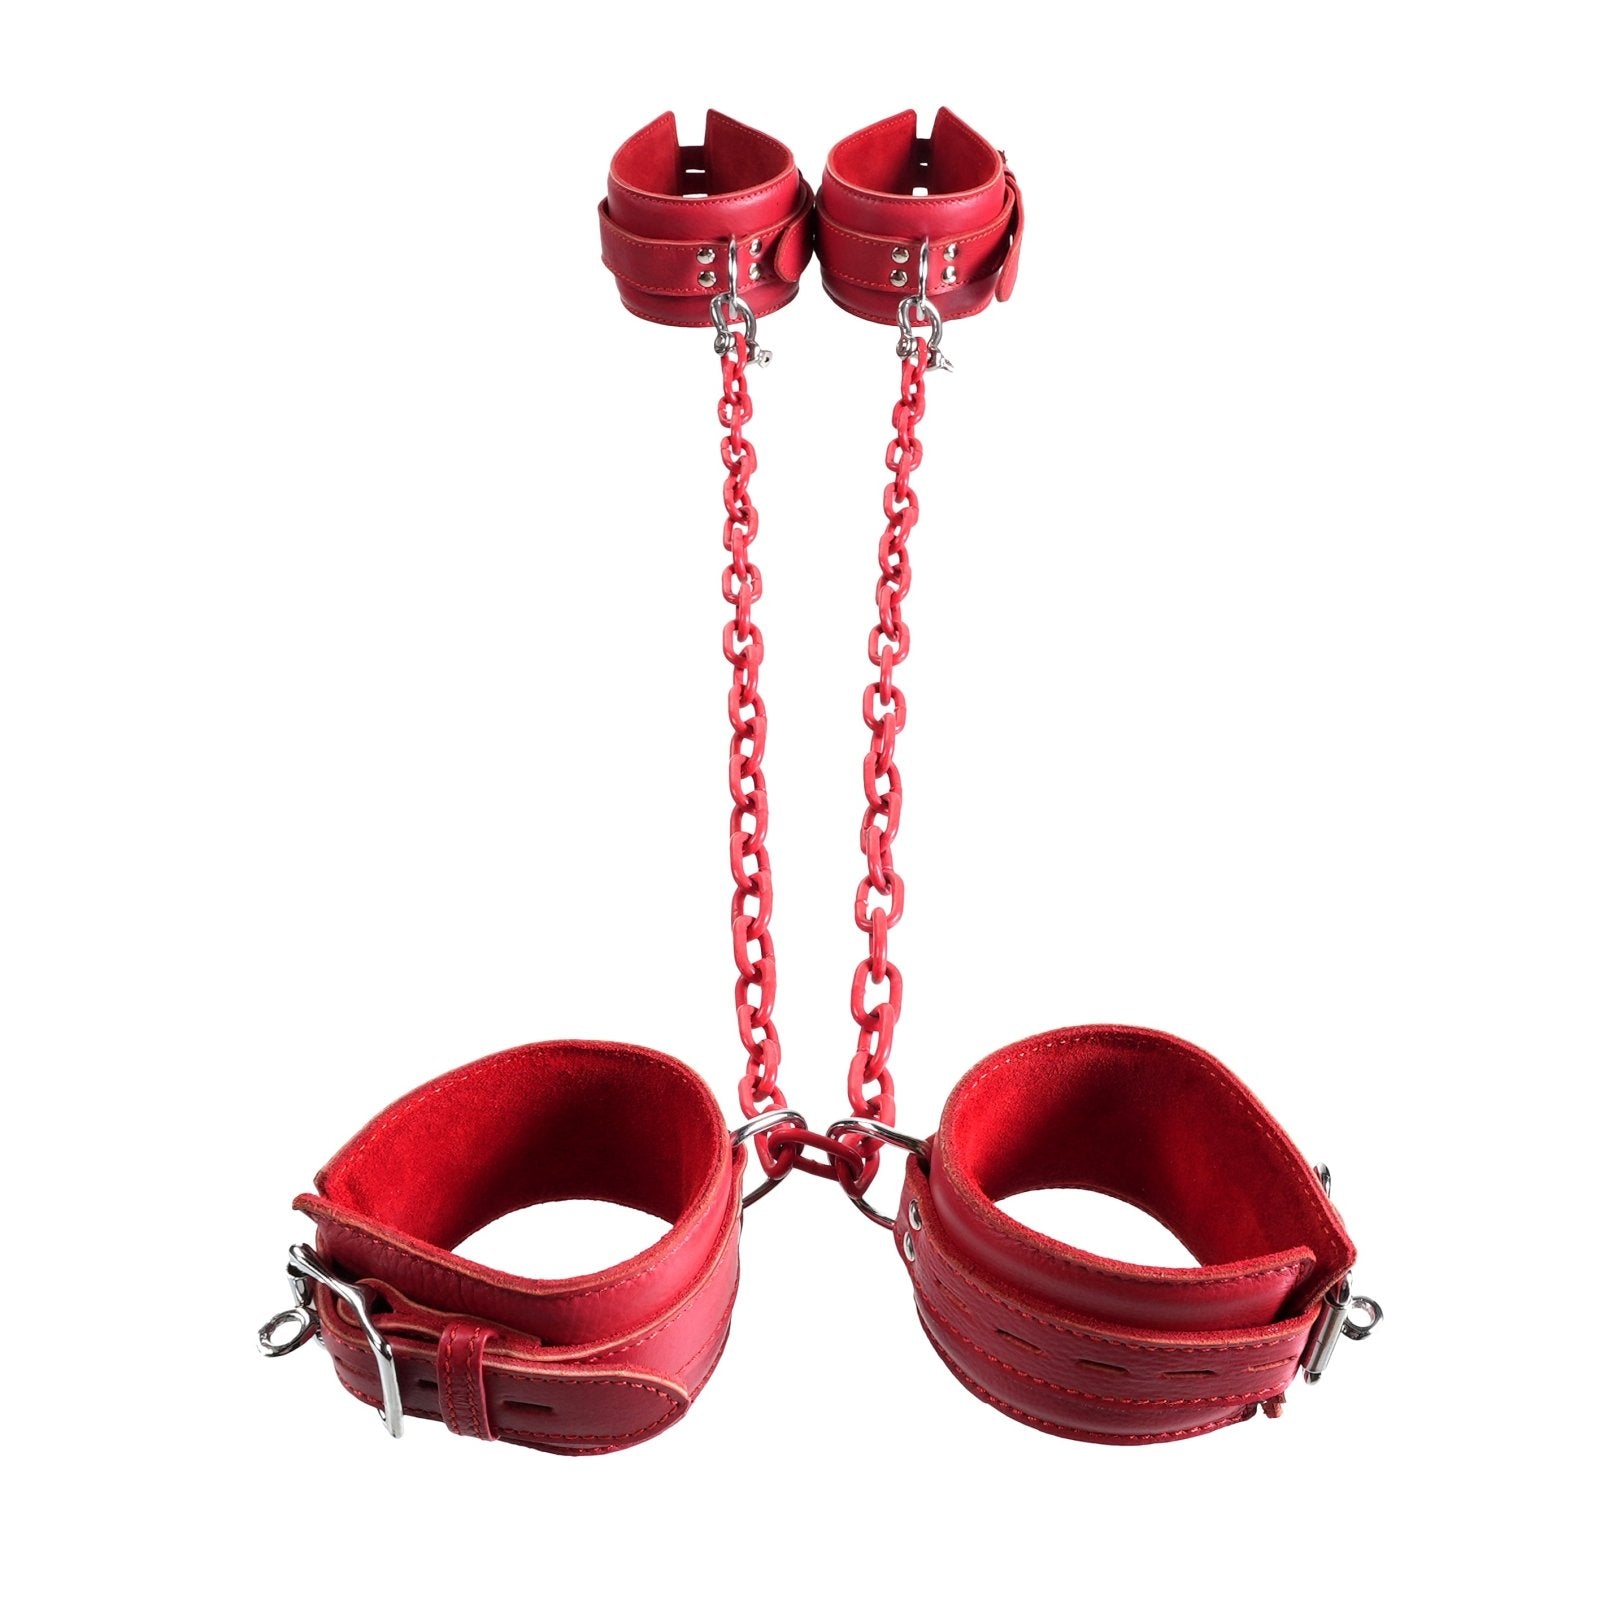 Core By Kink Leather Chained Hogtie Set - Kink Store